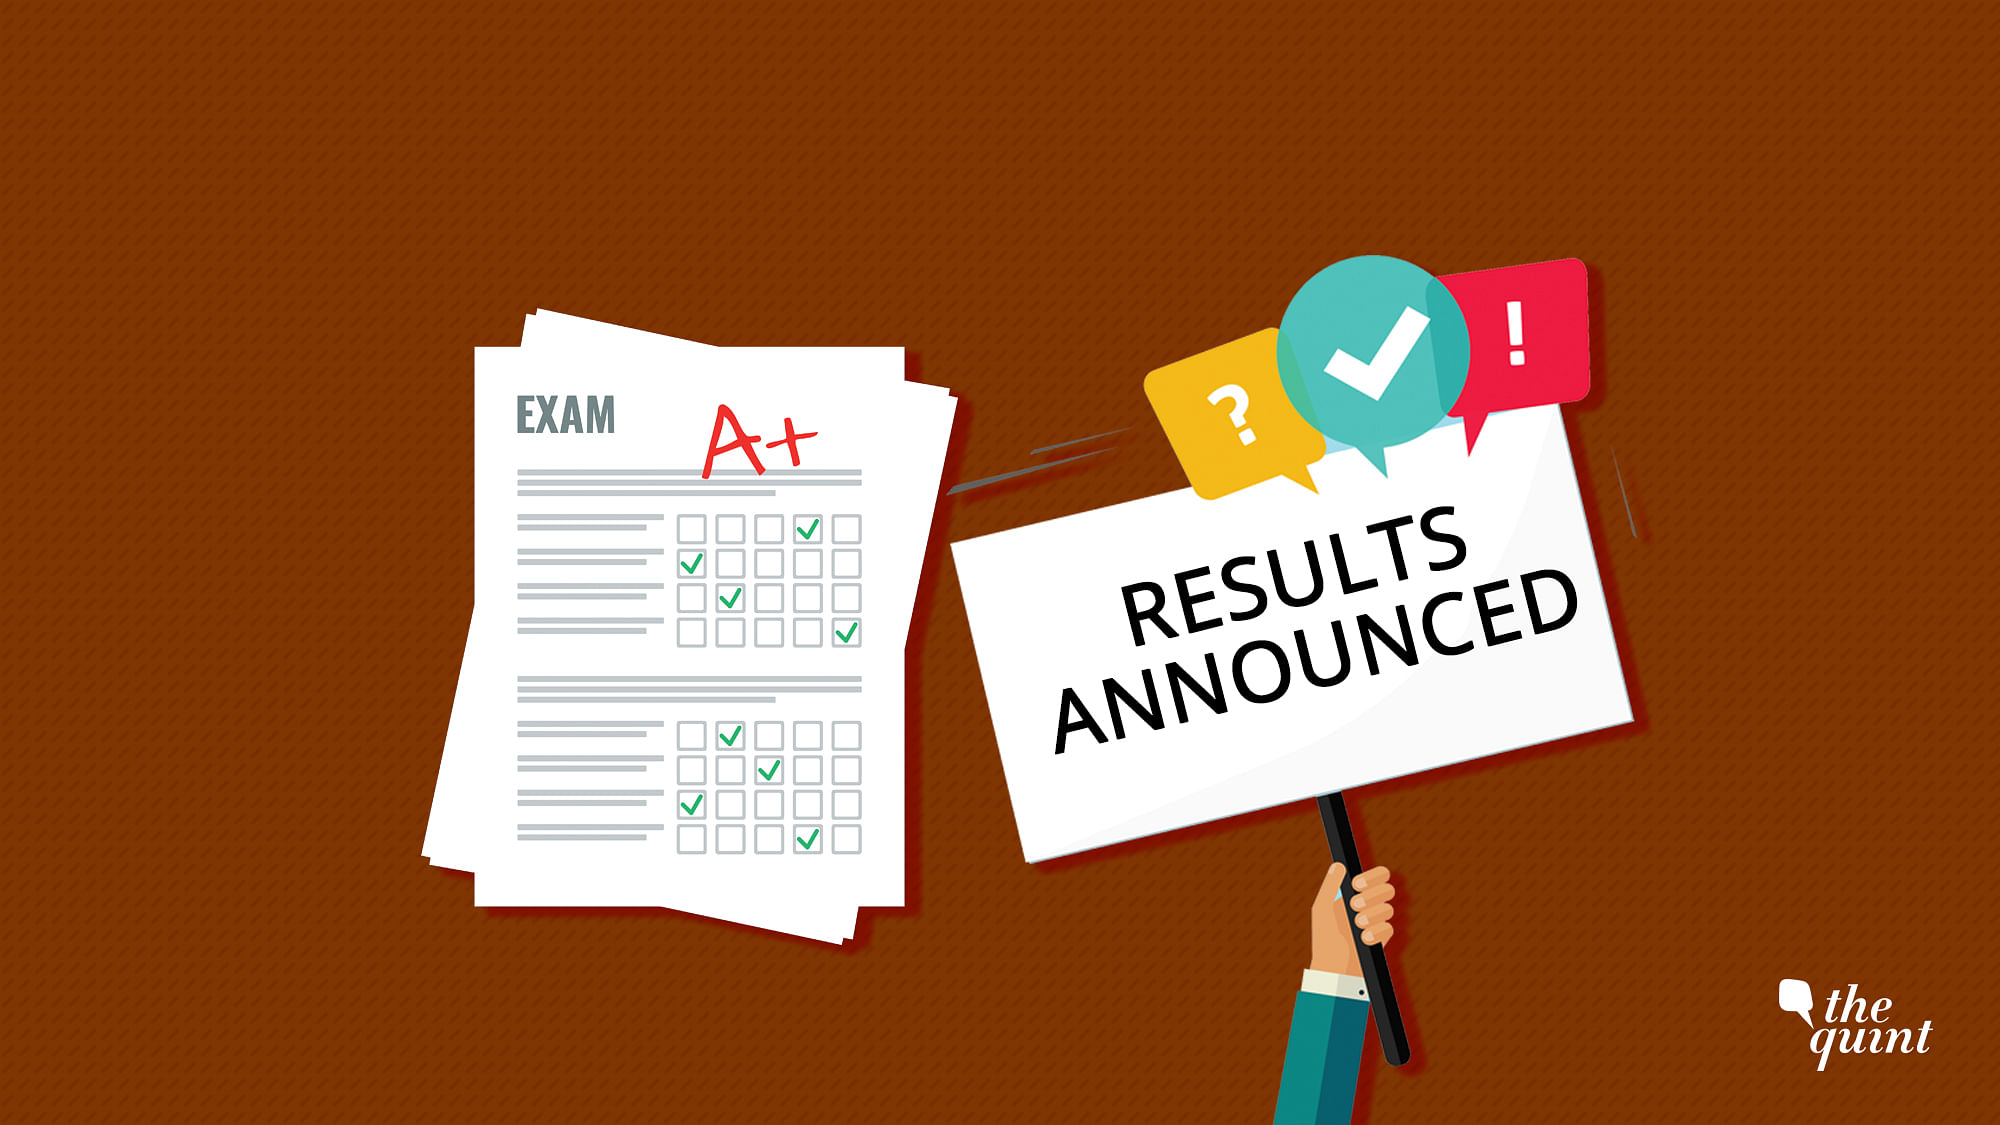 Students who had appeared for the examination can check their results through the official website<a href="http://www.biharboard.ac.in/"> </a>biharboard.ac.in<a href="http://www.biharboard.ac.in/">.</a>